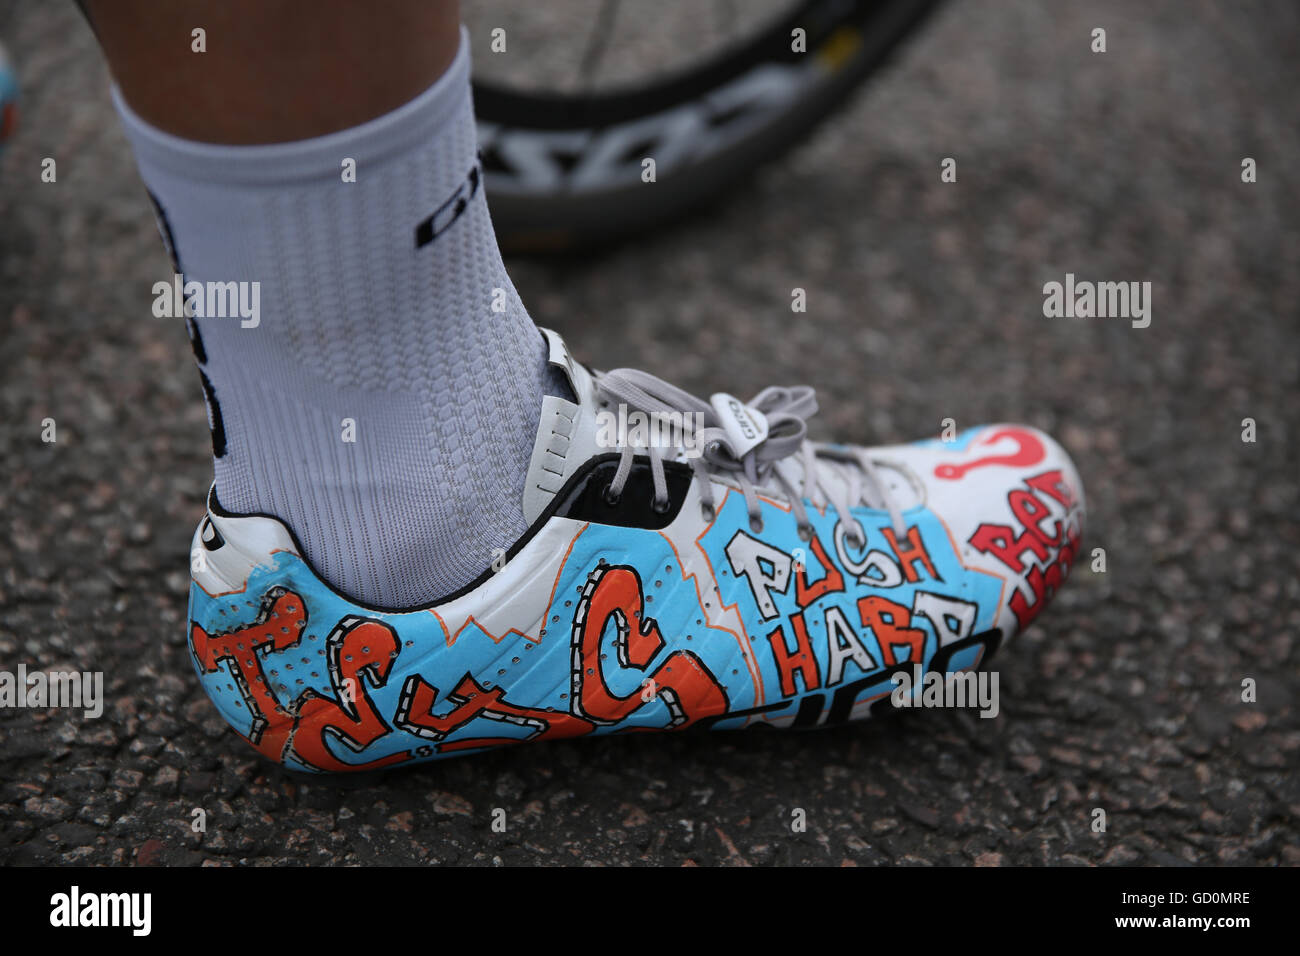 red hook crit shoes